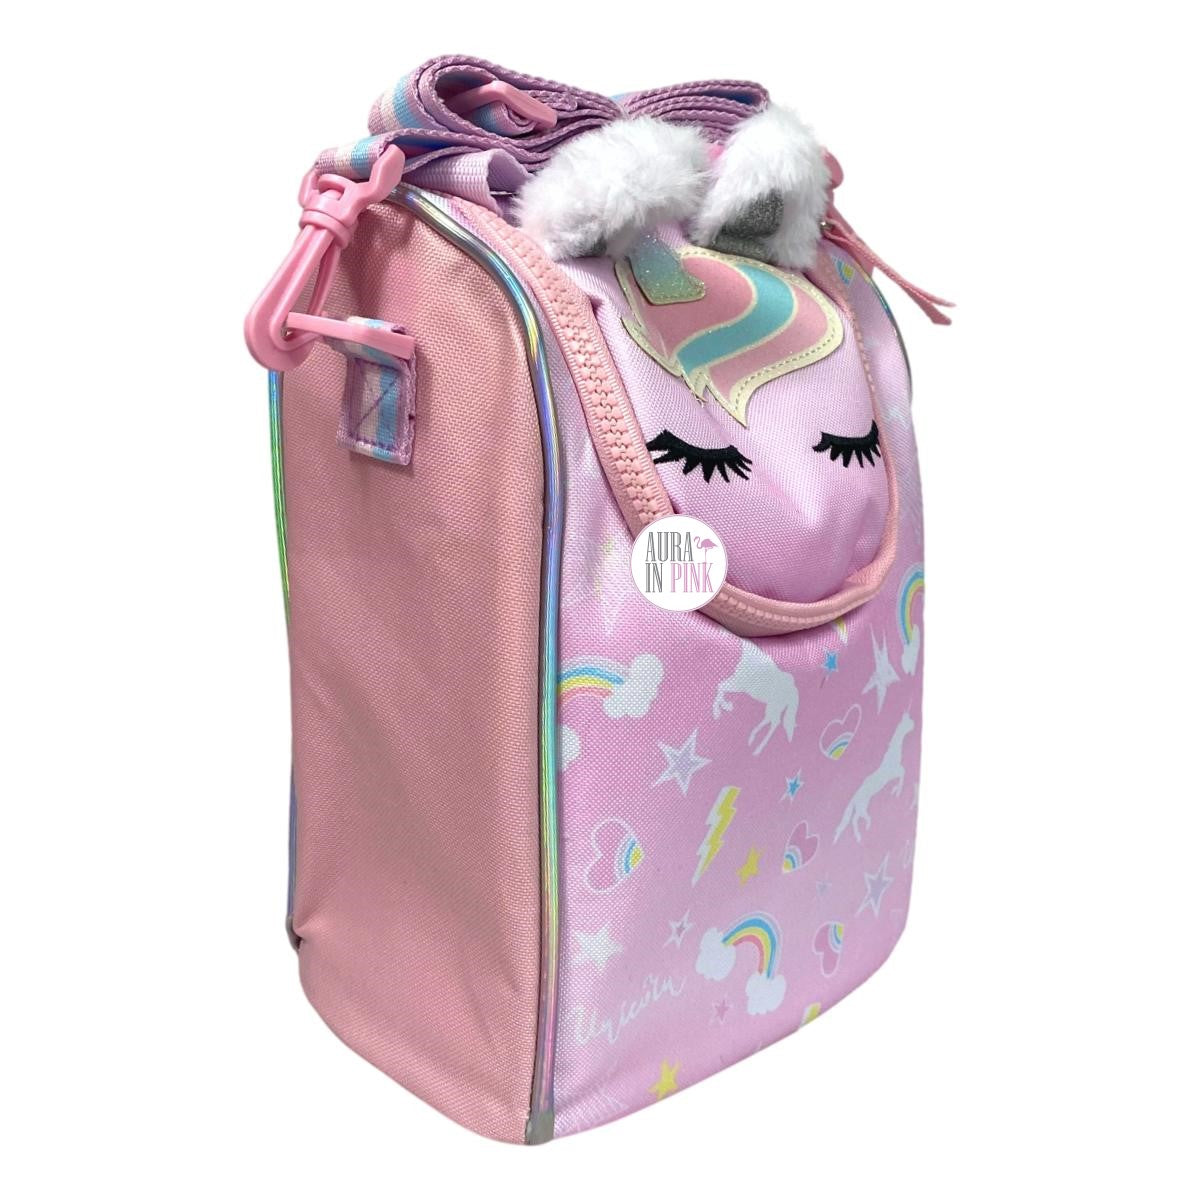 Ice Cream & Shine Pink Unicorn Insulated Lunch Tote Bag – Aura In Pink Inc.